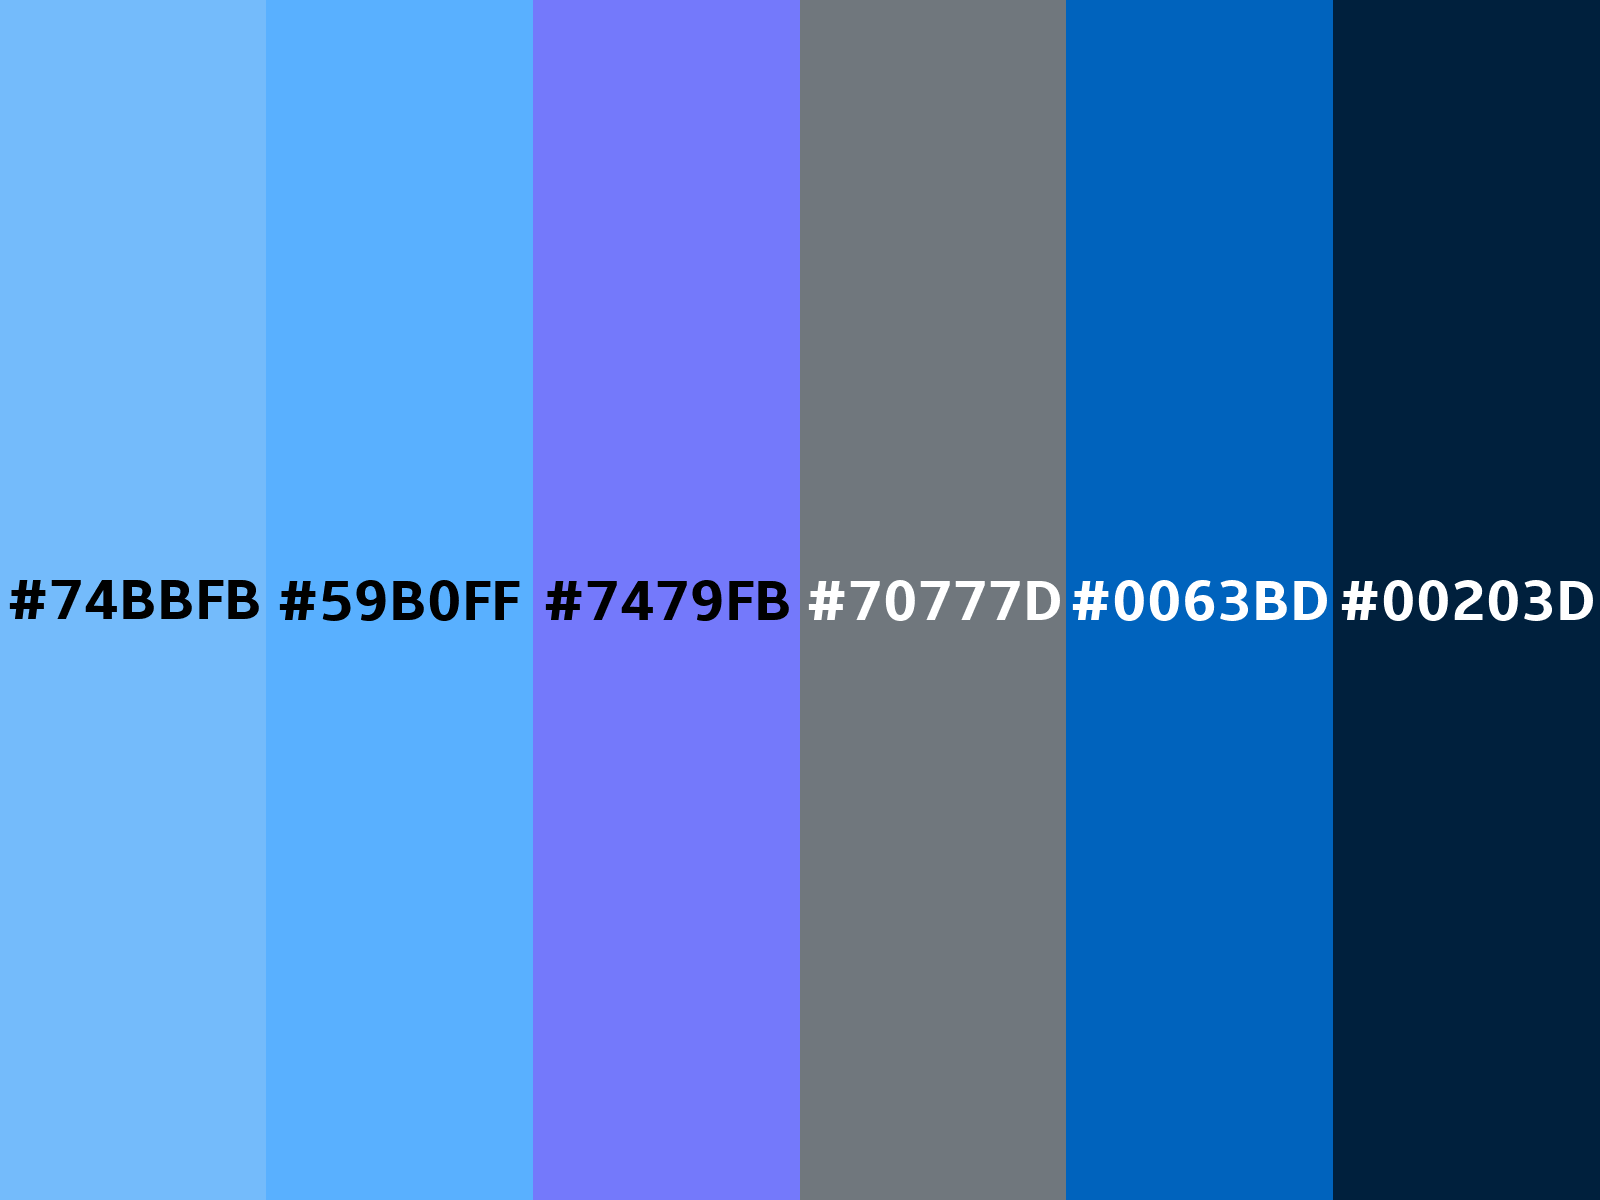 Very light azure color (Hex 74BBFB)